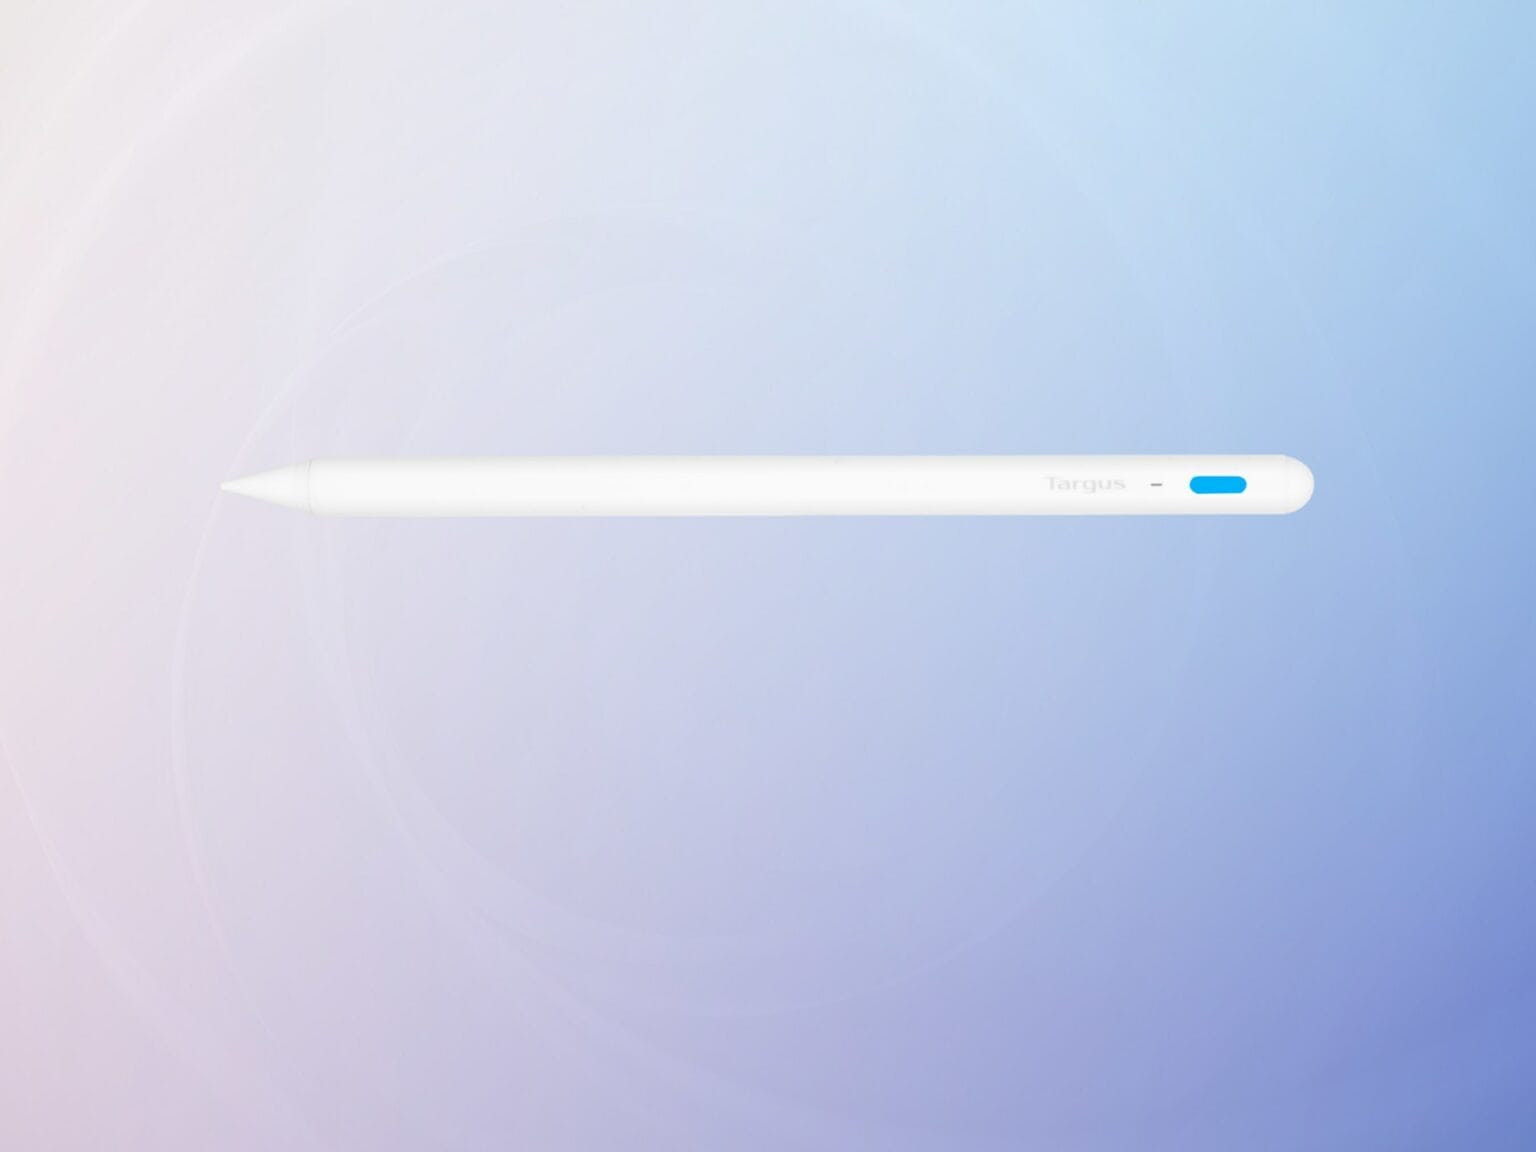 The new Targus active stylus for iPad is part of the company's antimicrobial line.